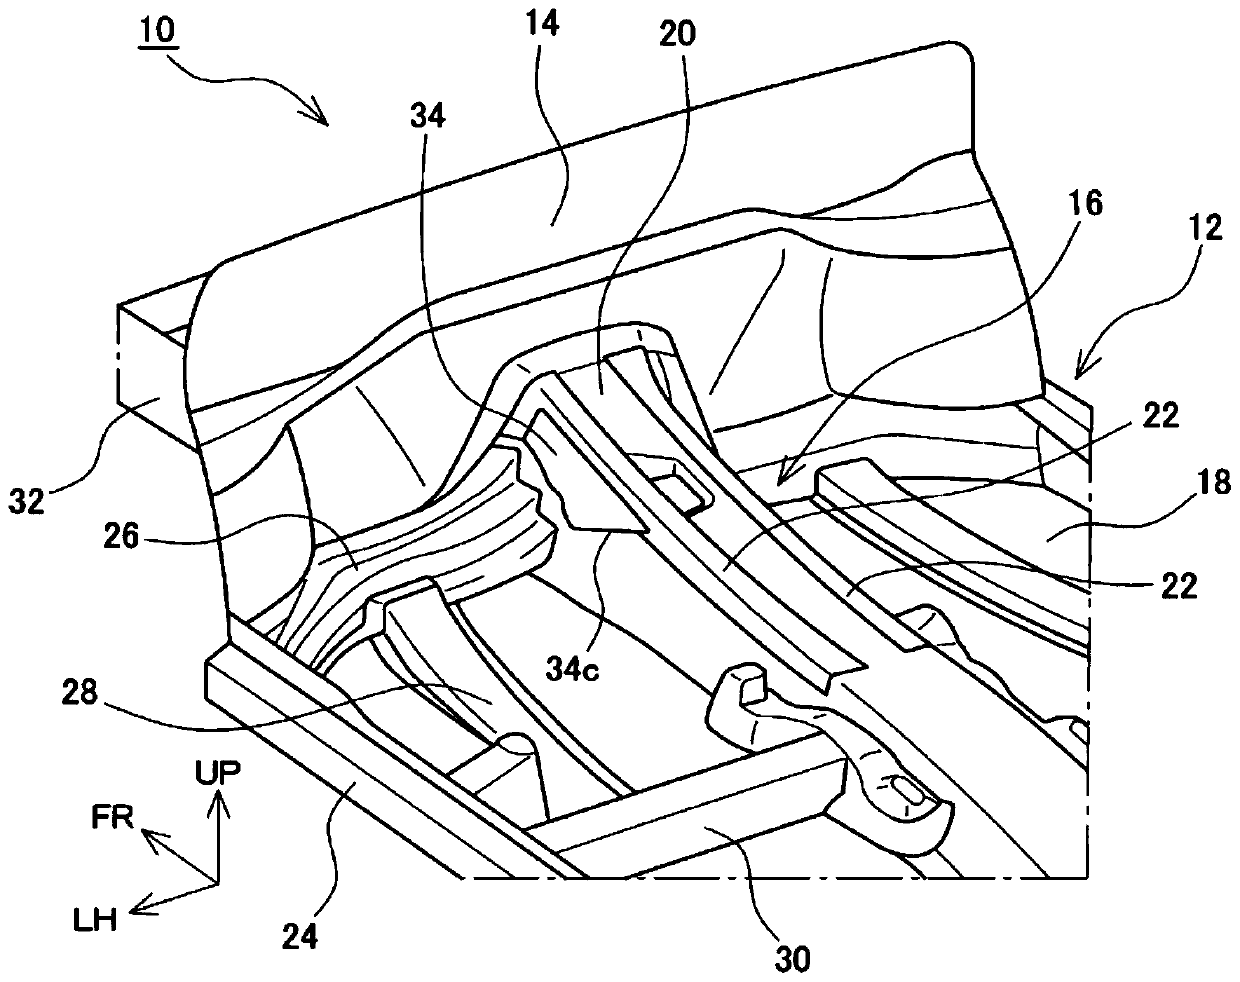 Vehicle underbody structure